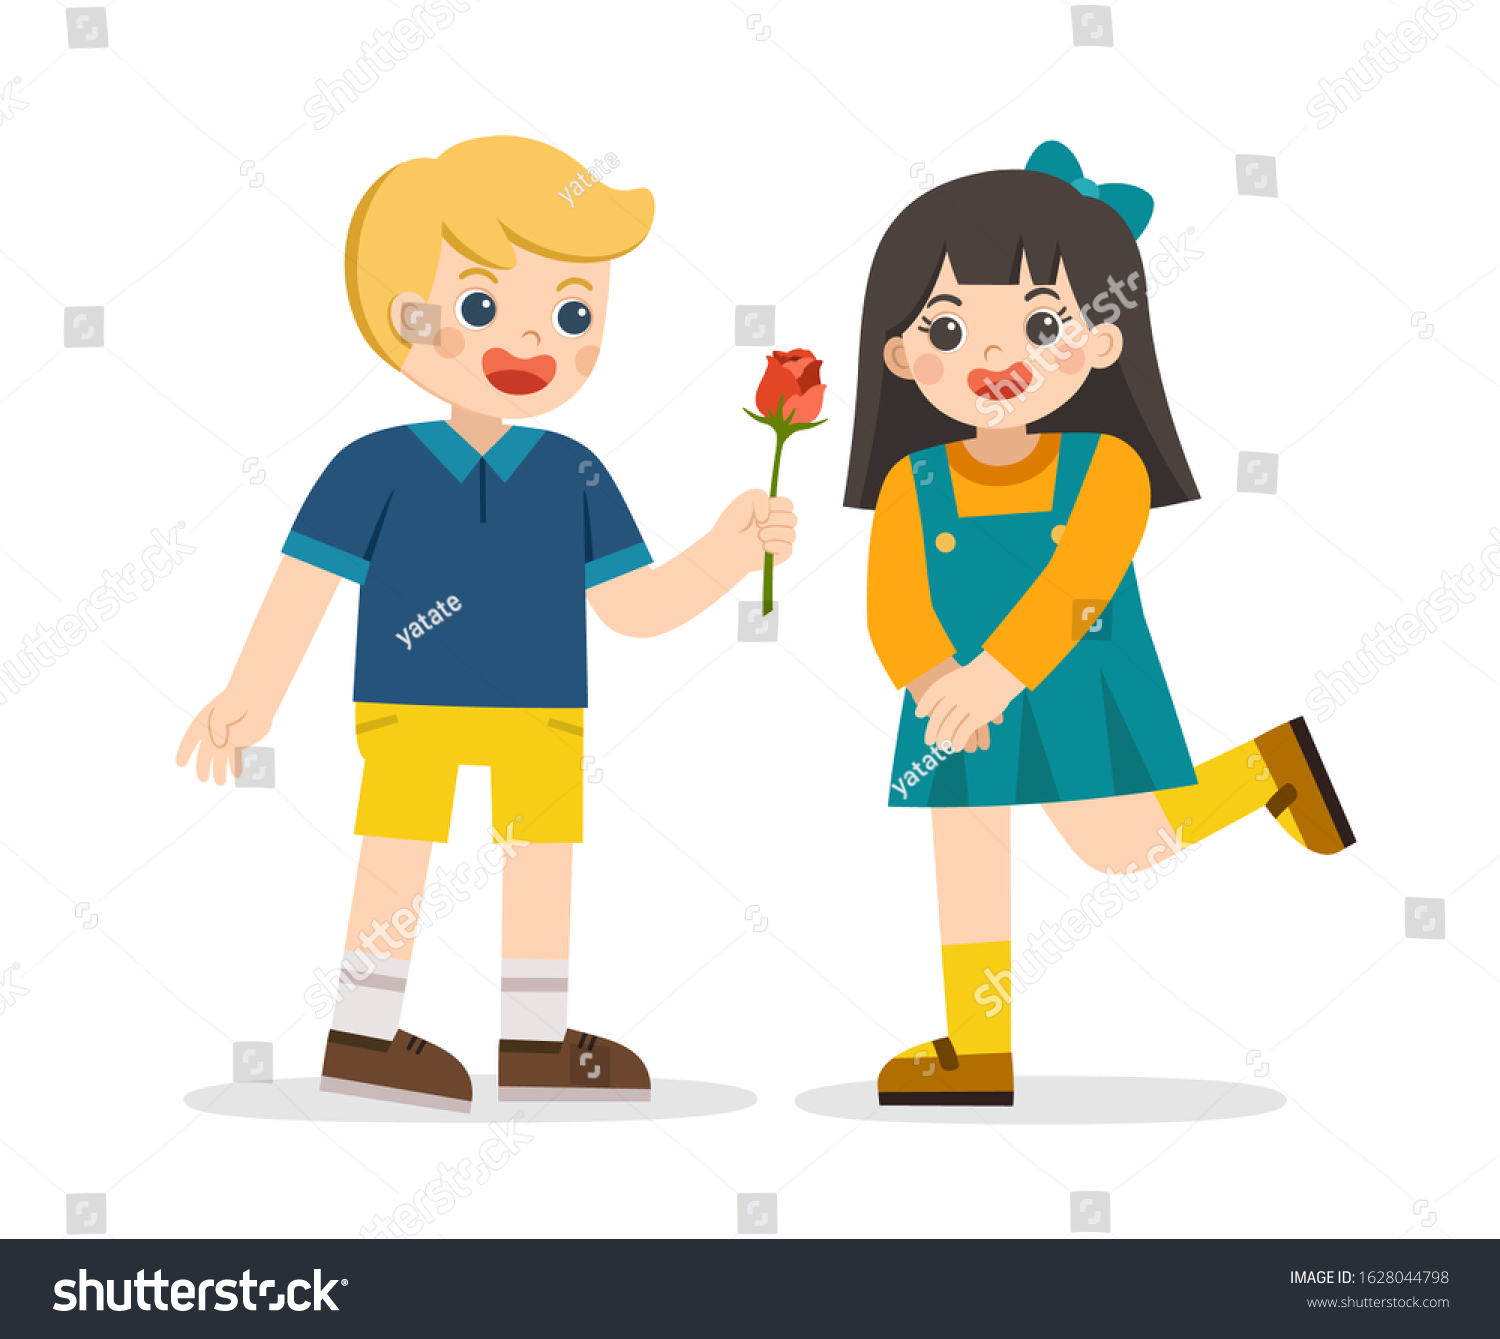 SVG of An enamored boy is giving a rose to girl. Little boy in love giving cute girl. Couple propose with flower. Couple on romantic date. svg